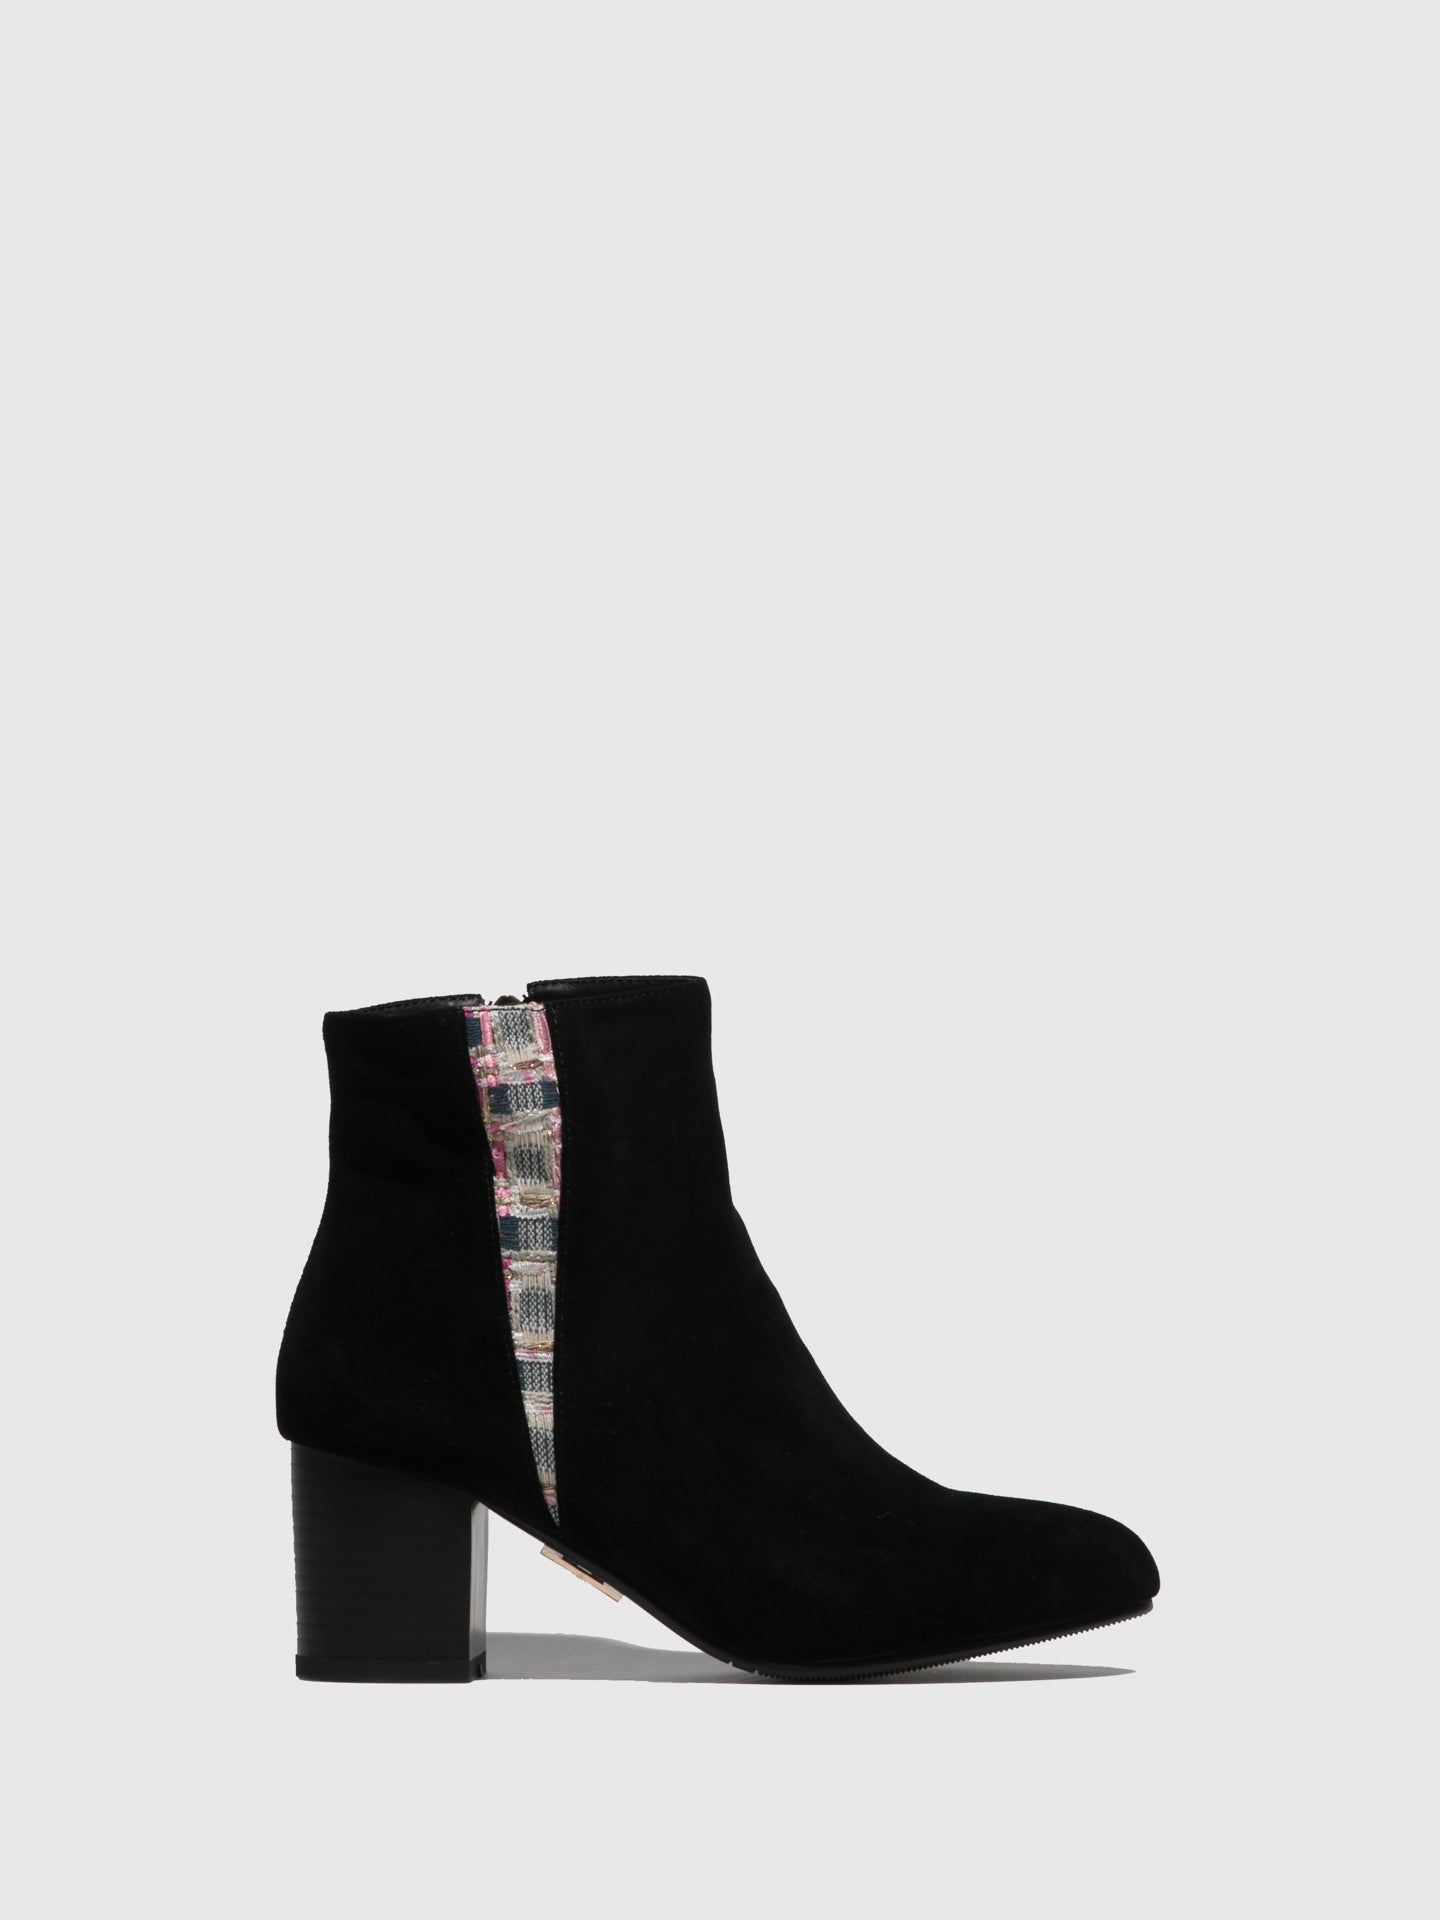 Yull Black Round Toe Ankle Boots